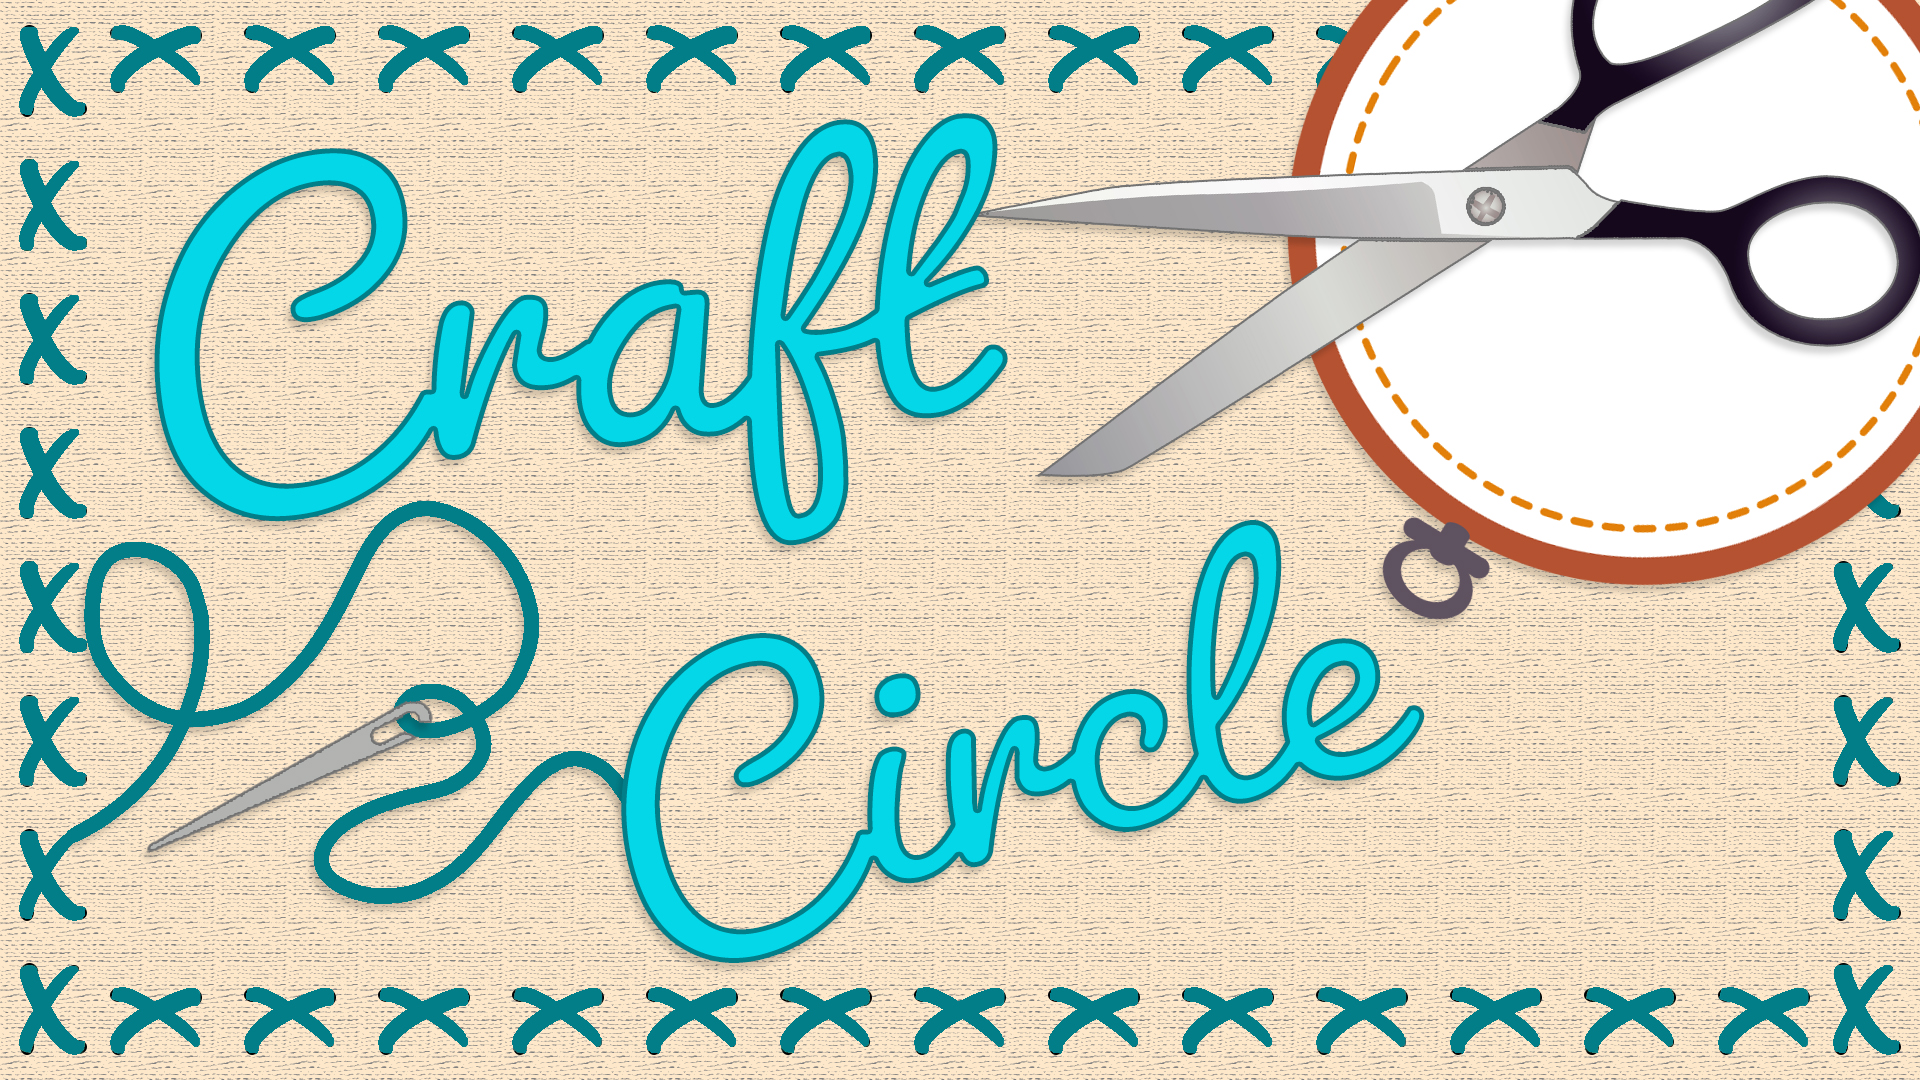 Image reads "Craft Circle" against a burlap background. There are cross stitches as a border around the image. An embroidery hoop and a pair of scissors cover the top right corner. A threaded needle is in the bottom left corner. 